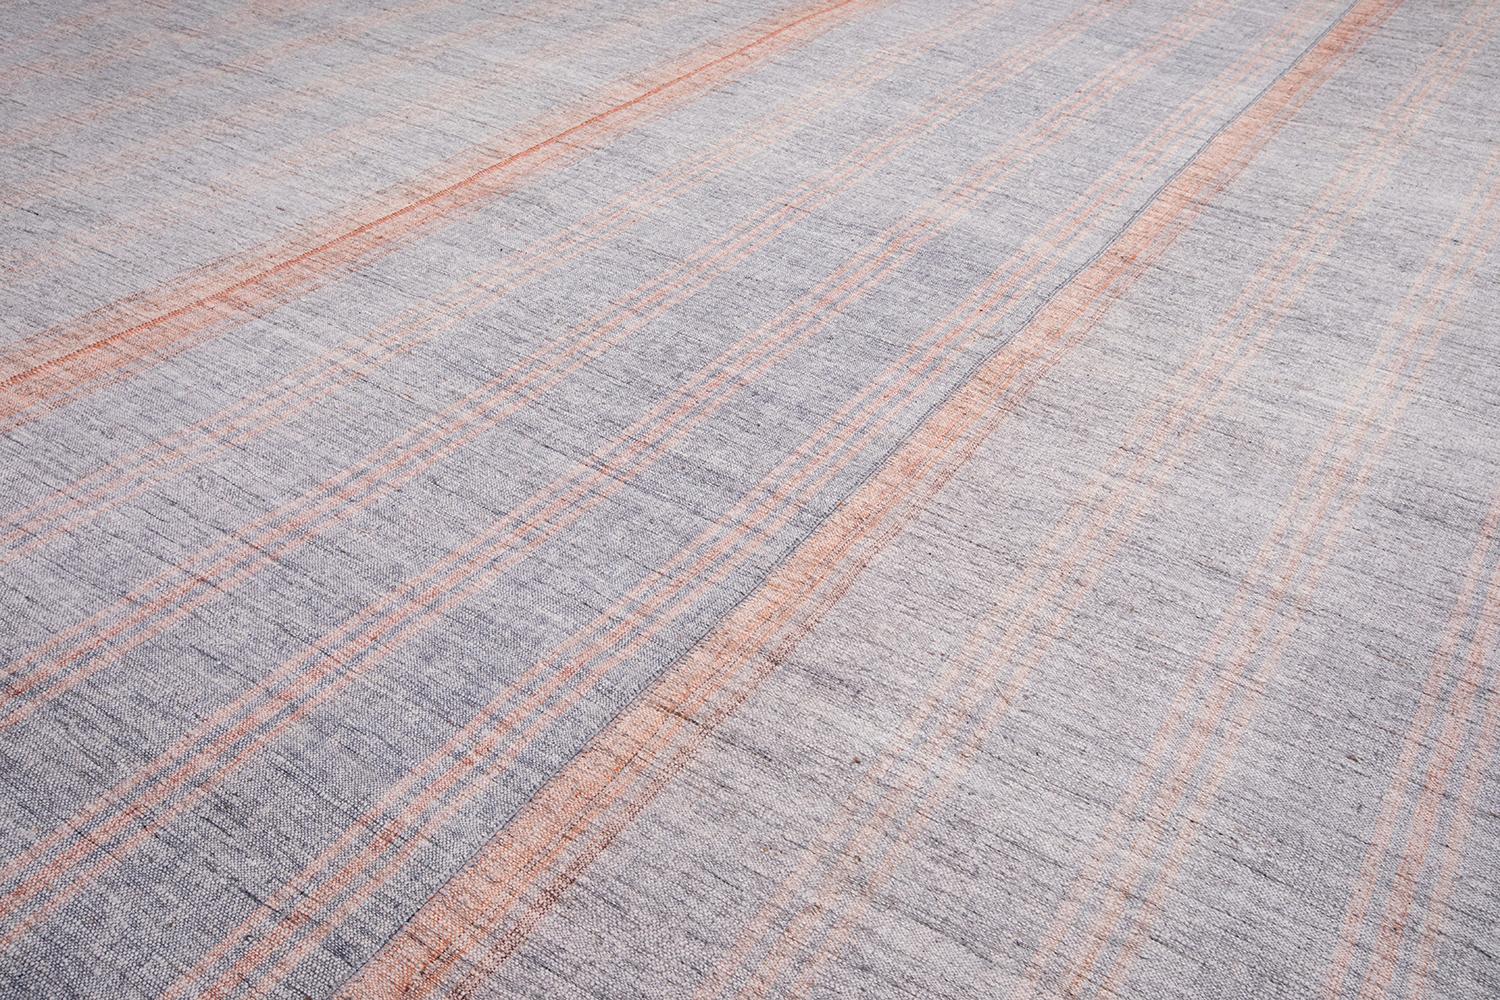 The Mid-Century Modern Collection is skillfully sourced by N A S I R I and exclusive to our showroom. These flatweaves embody the minimalist sophistication that emerged in the mid-20th century which continues to thrive today. We bridge the elements